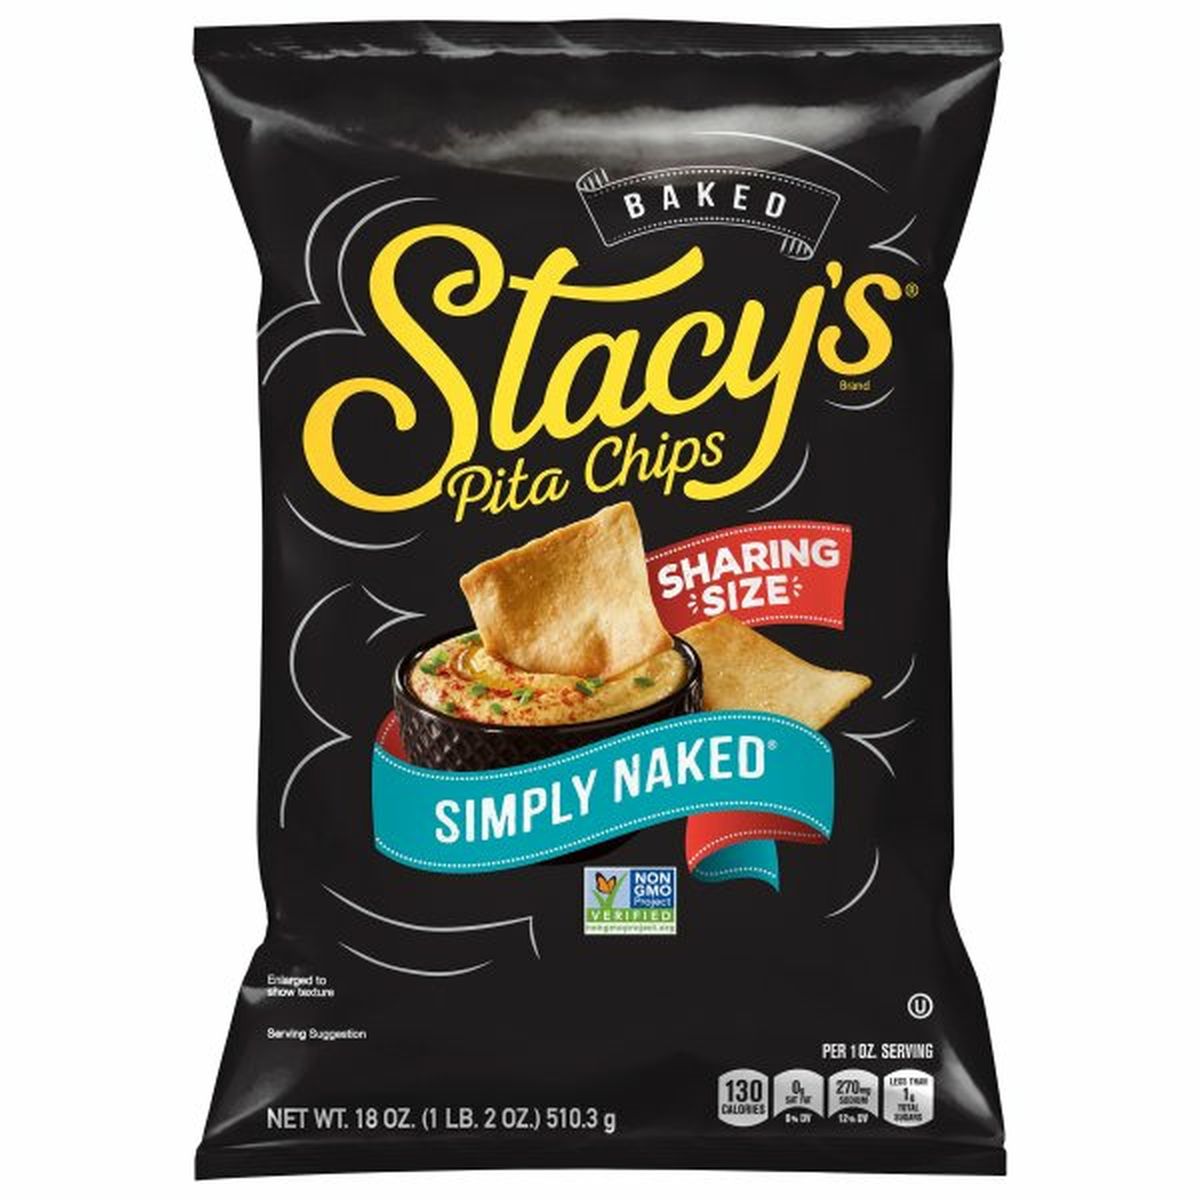 Calories in Stacy's Baked Pita Chips, Simply Naked